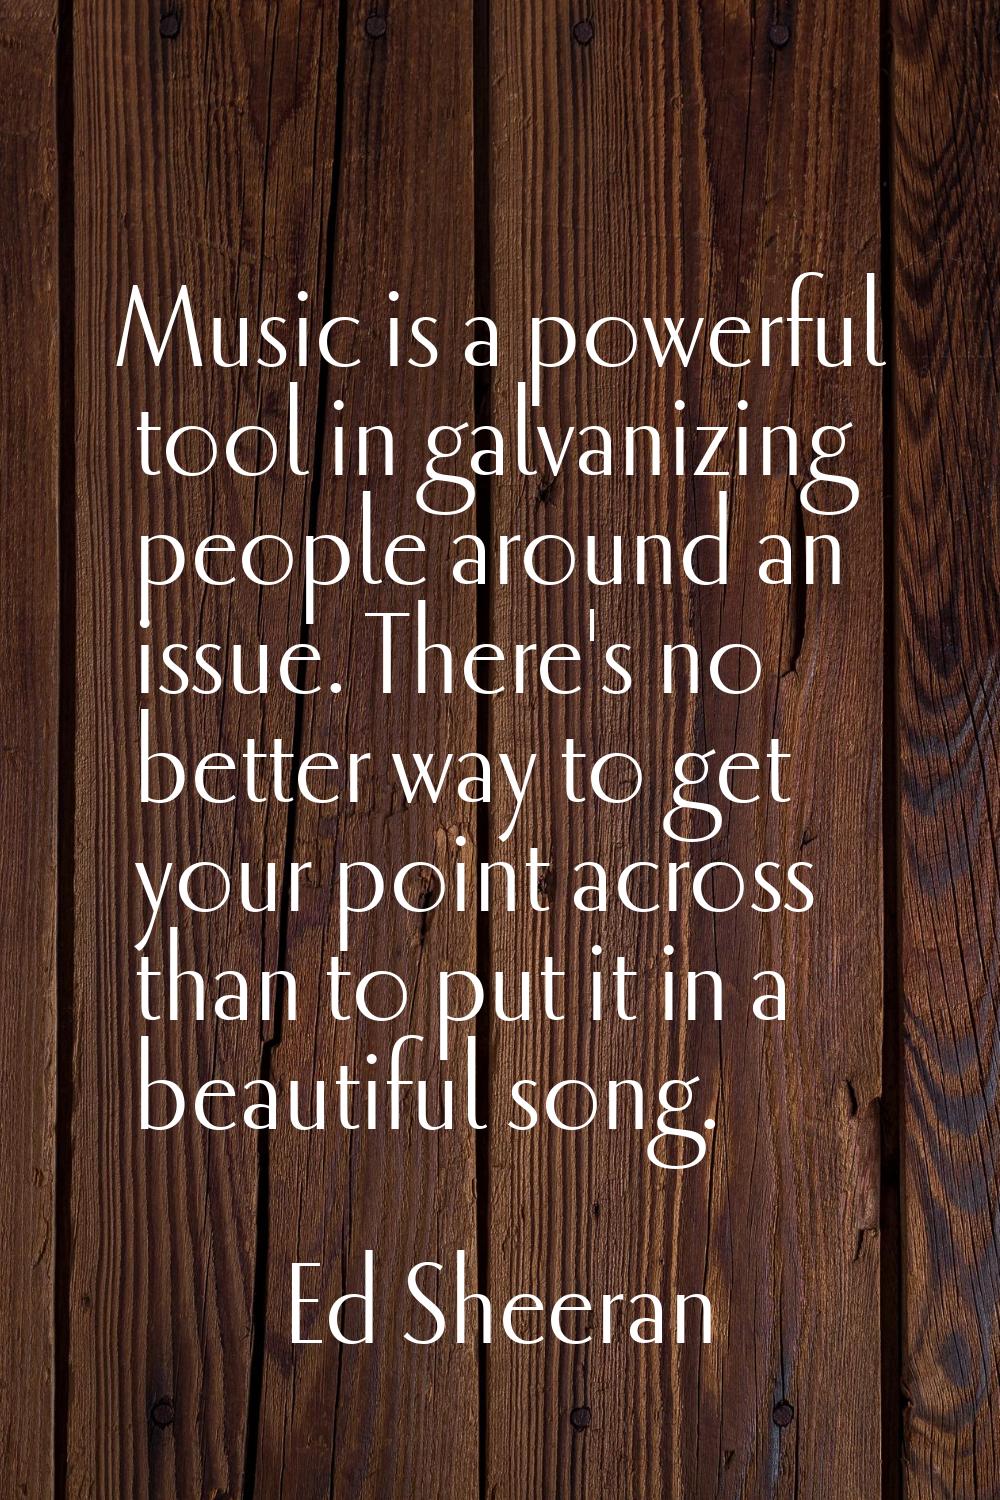 Music is a powerful tool in galvanizing people around an issue. There's no better way to get your p